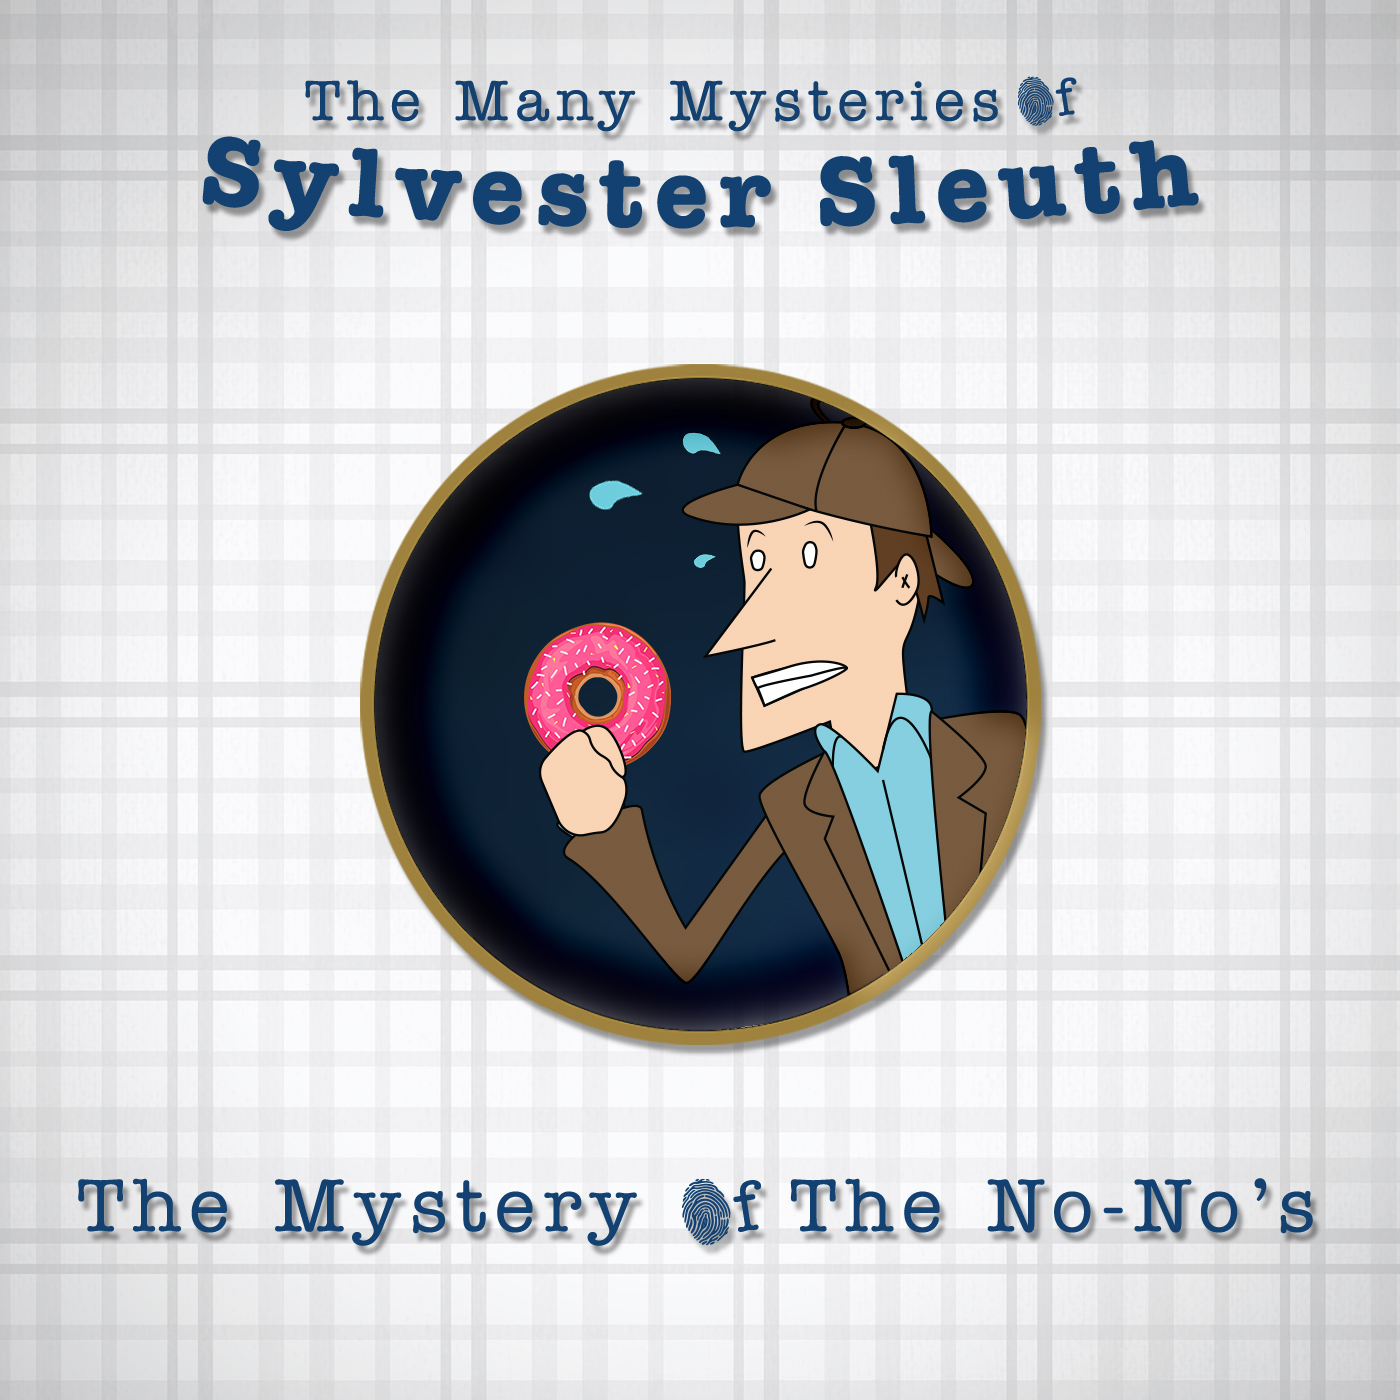 Sylvester Sleuth and the Mystery of the No-No's